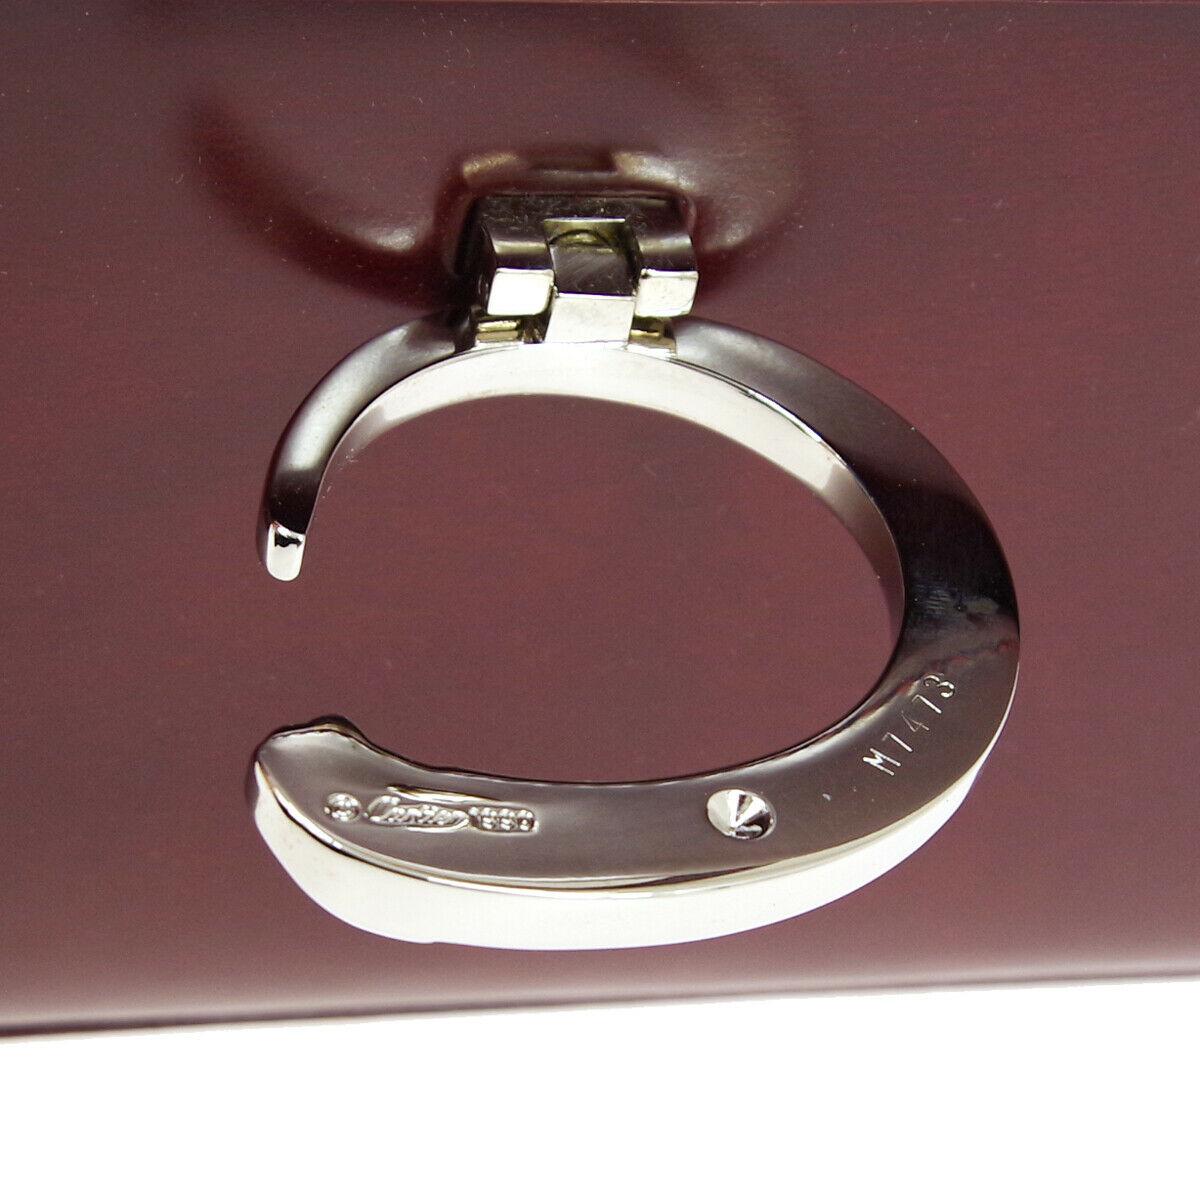 
Patent leather
Silver tone hardware
Twill lining
Turnlock closure
Made in France
Measures 8.5